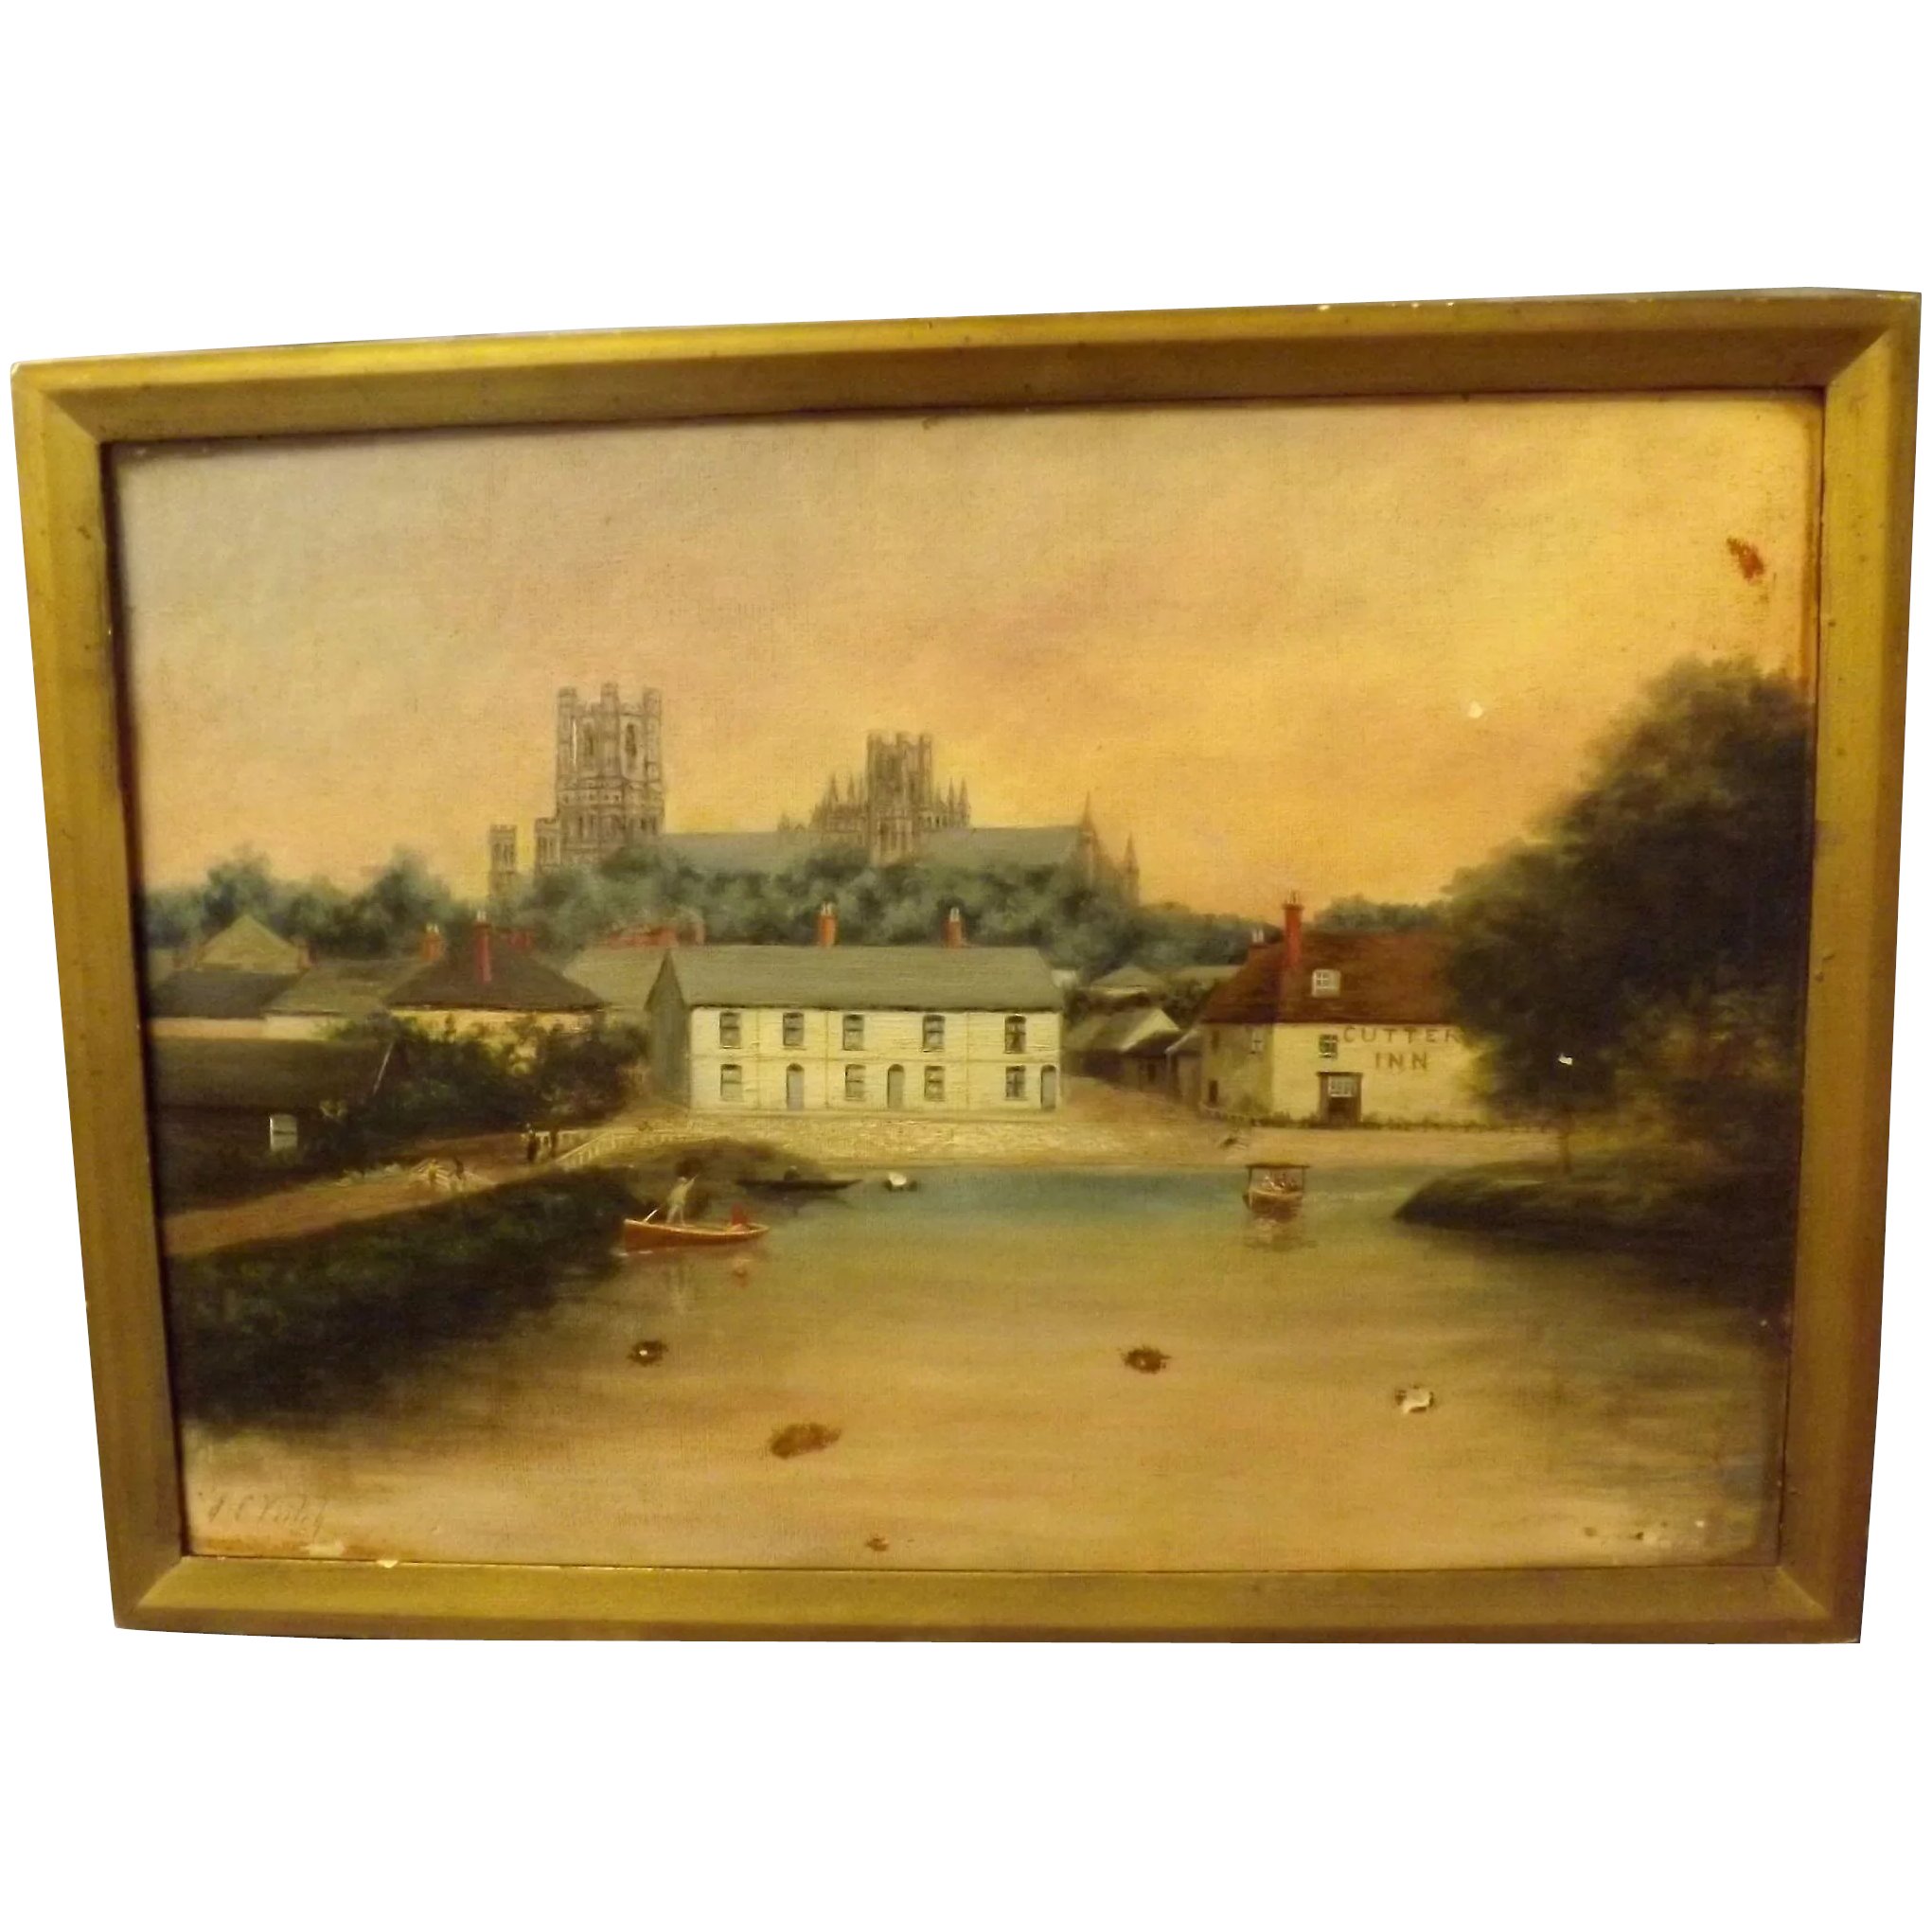 'River Ouse - Ely' Oil on Board By John Charles Veitch Circa 1890 - 1900